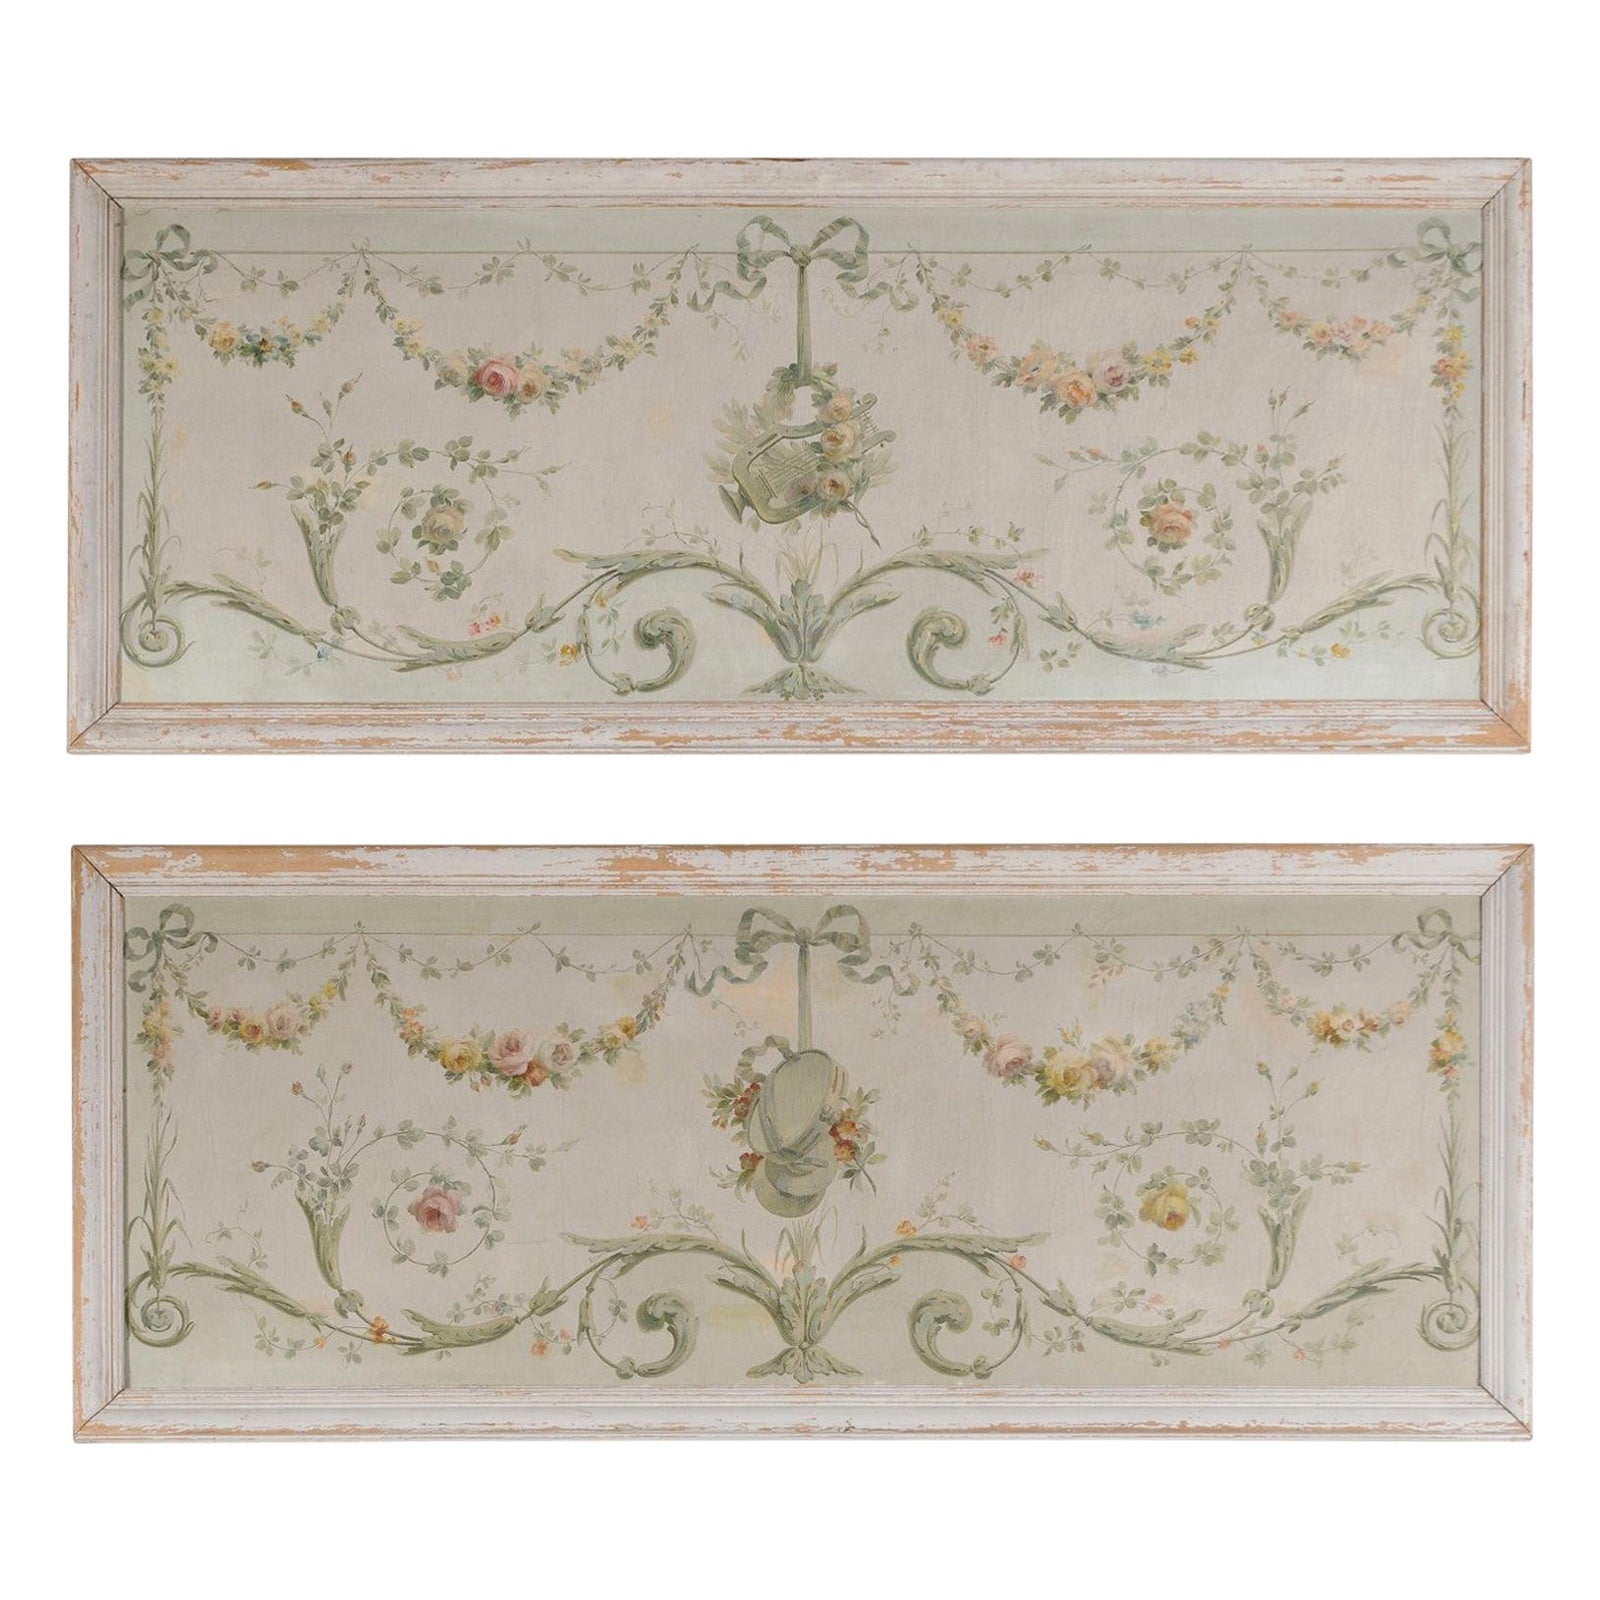 Pair of French Napoléon III 1860s Oil on Canvas Overdoors with Floral Garlands For Sale